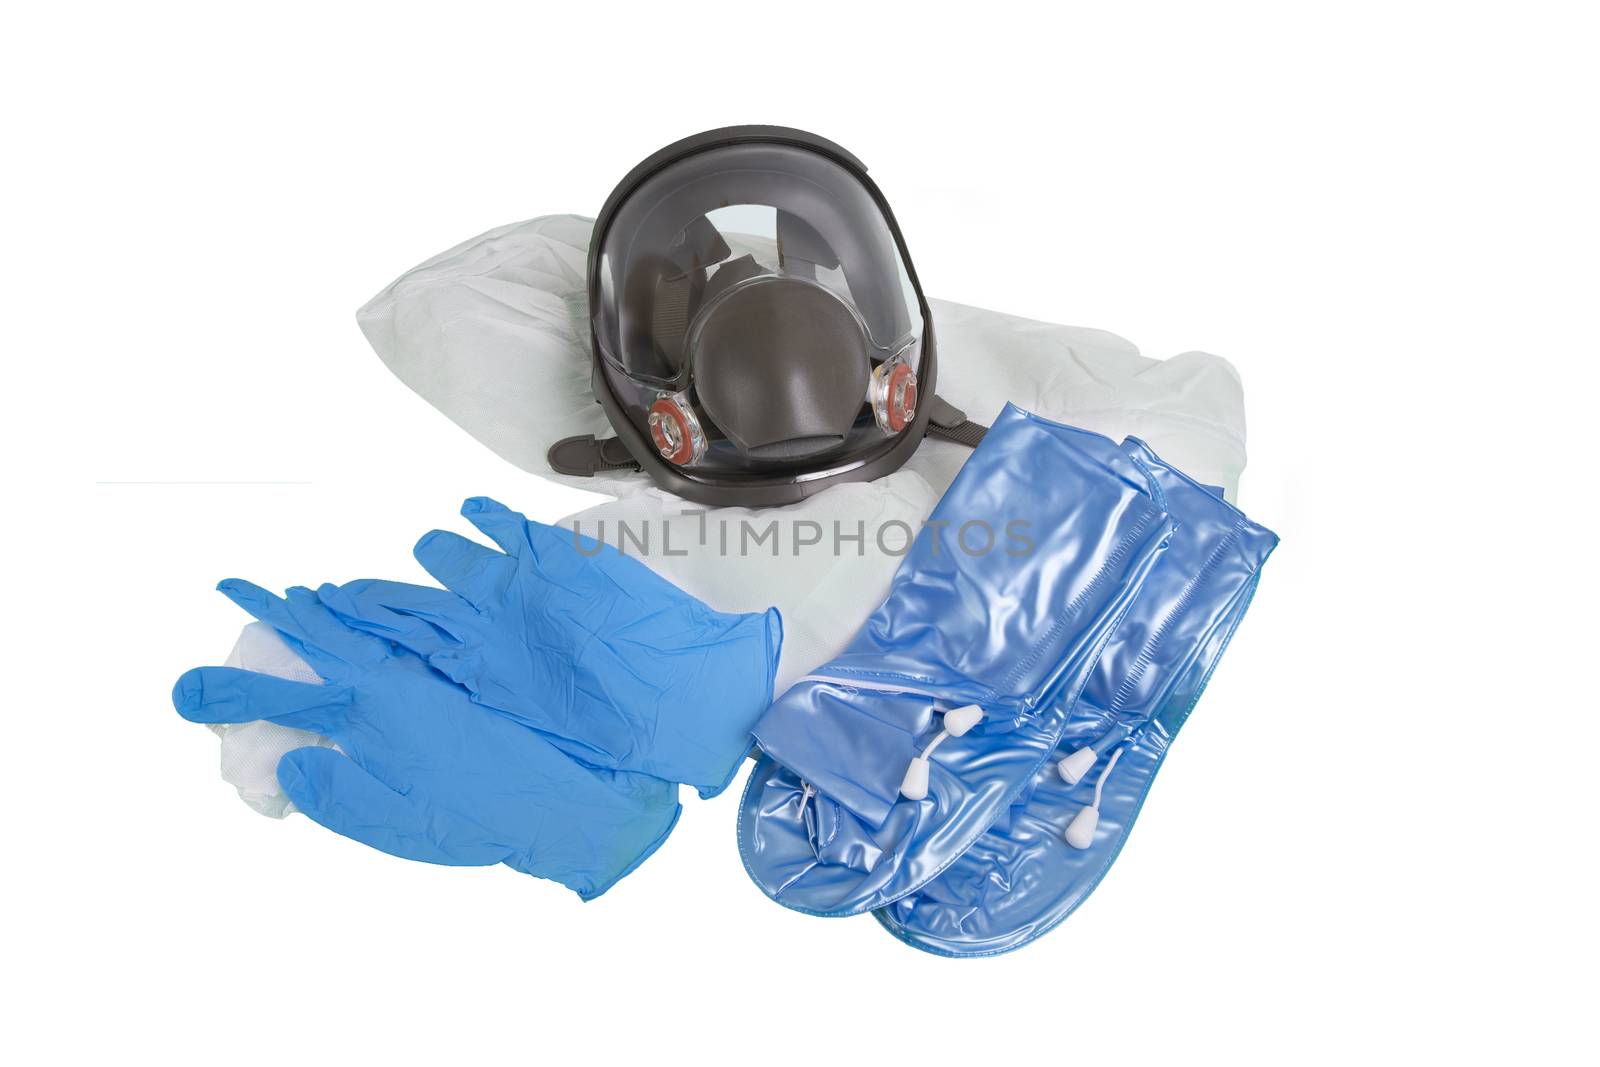 Full face gas mask, protective clothing, gloves and shoes for infection or air pollution protection on white background.